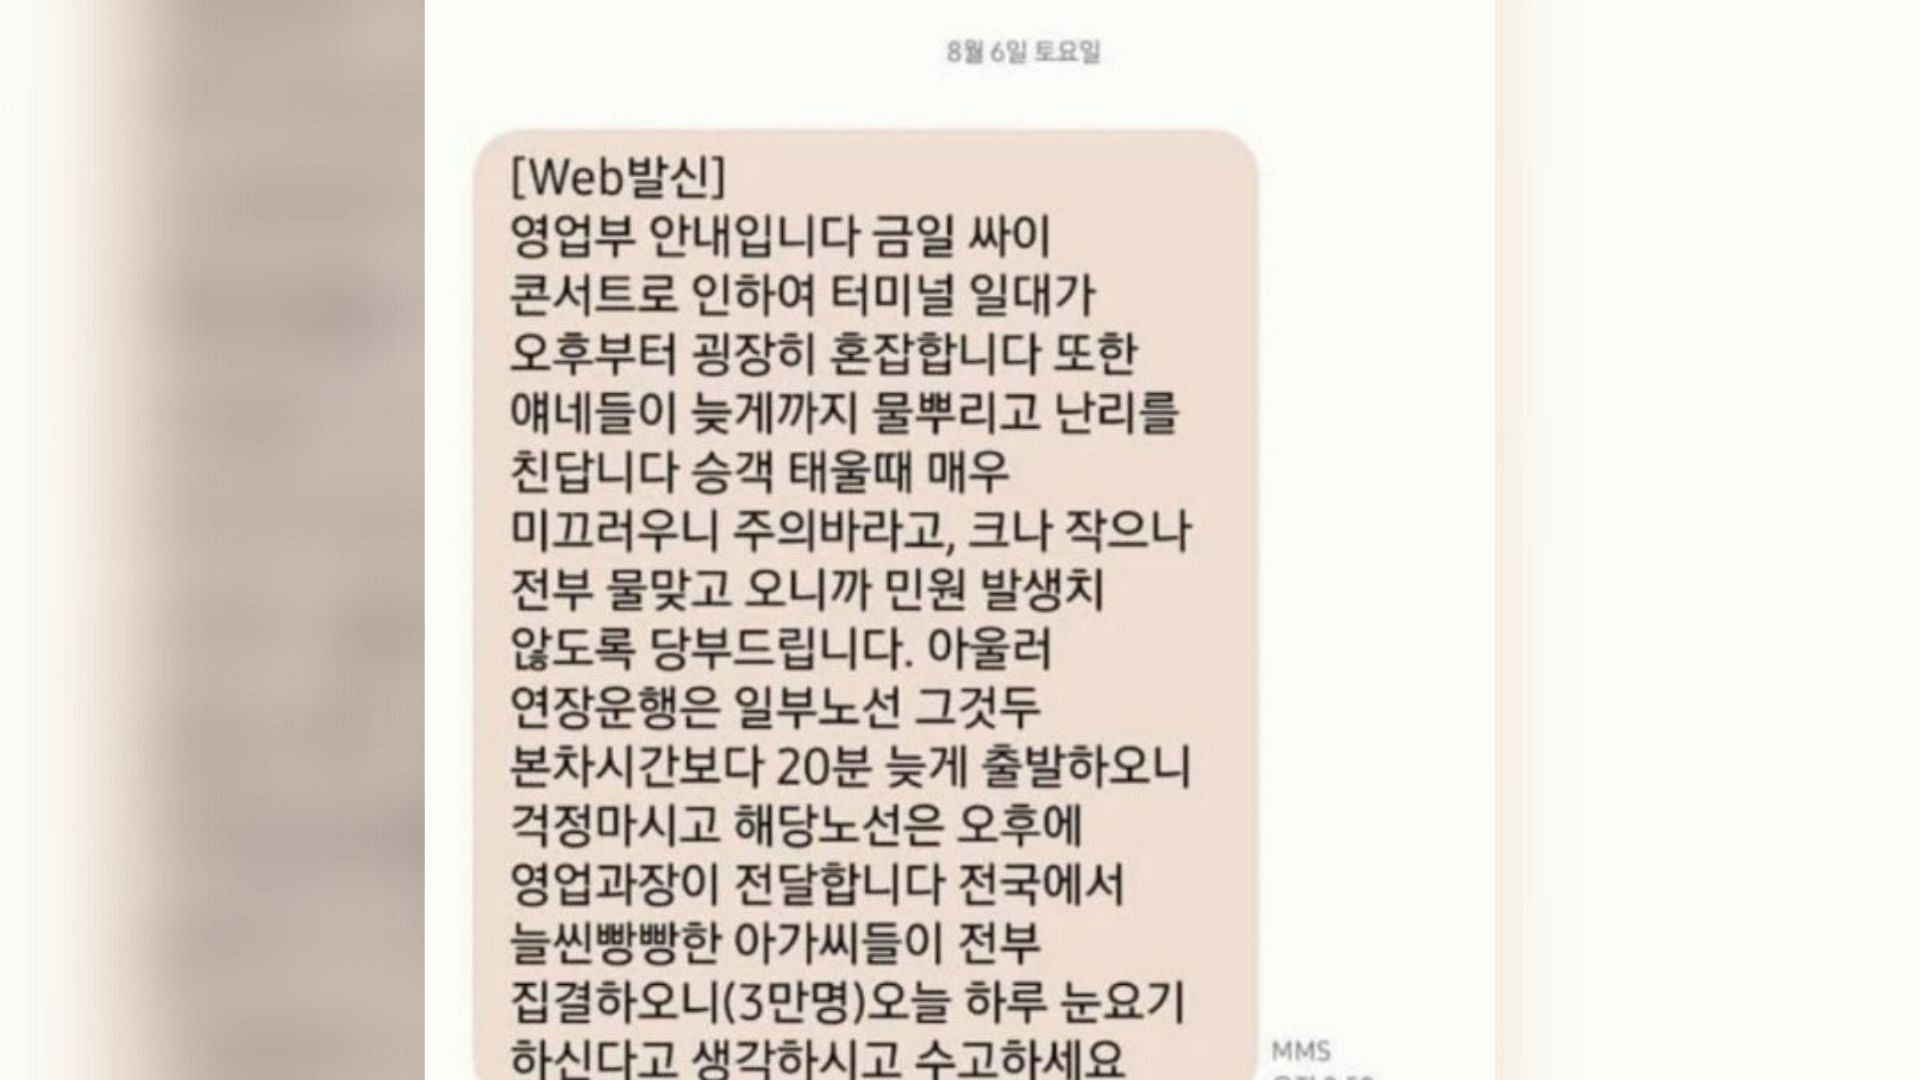 The text message sent by the bus company to its employees (Image via SBS News)